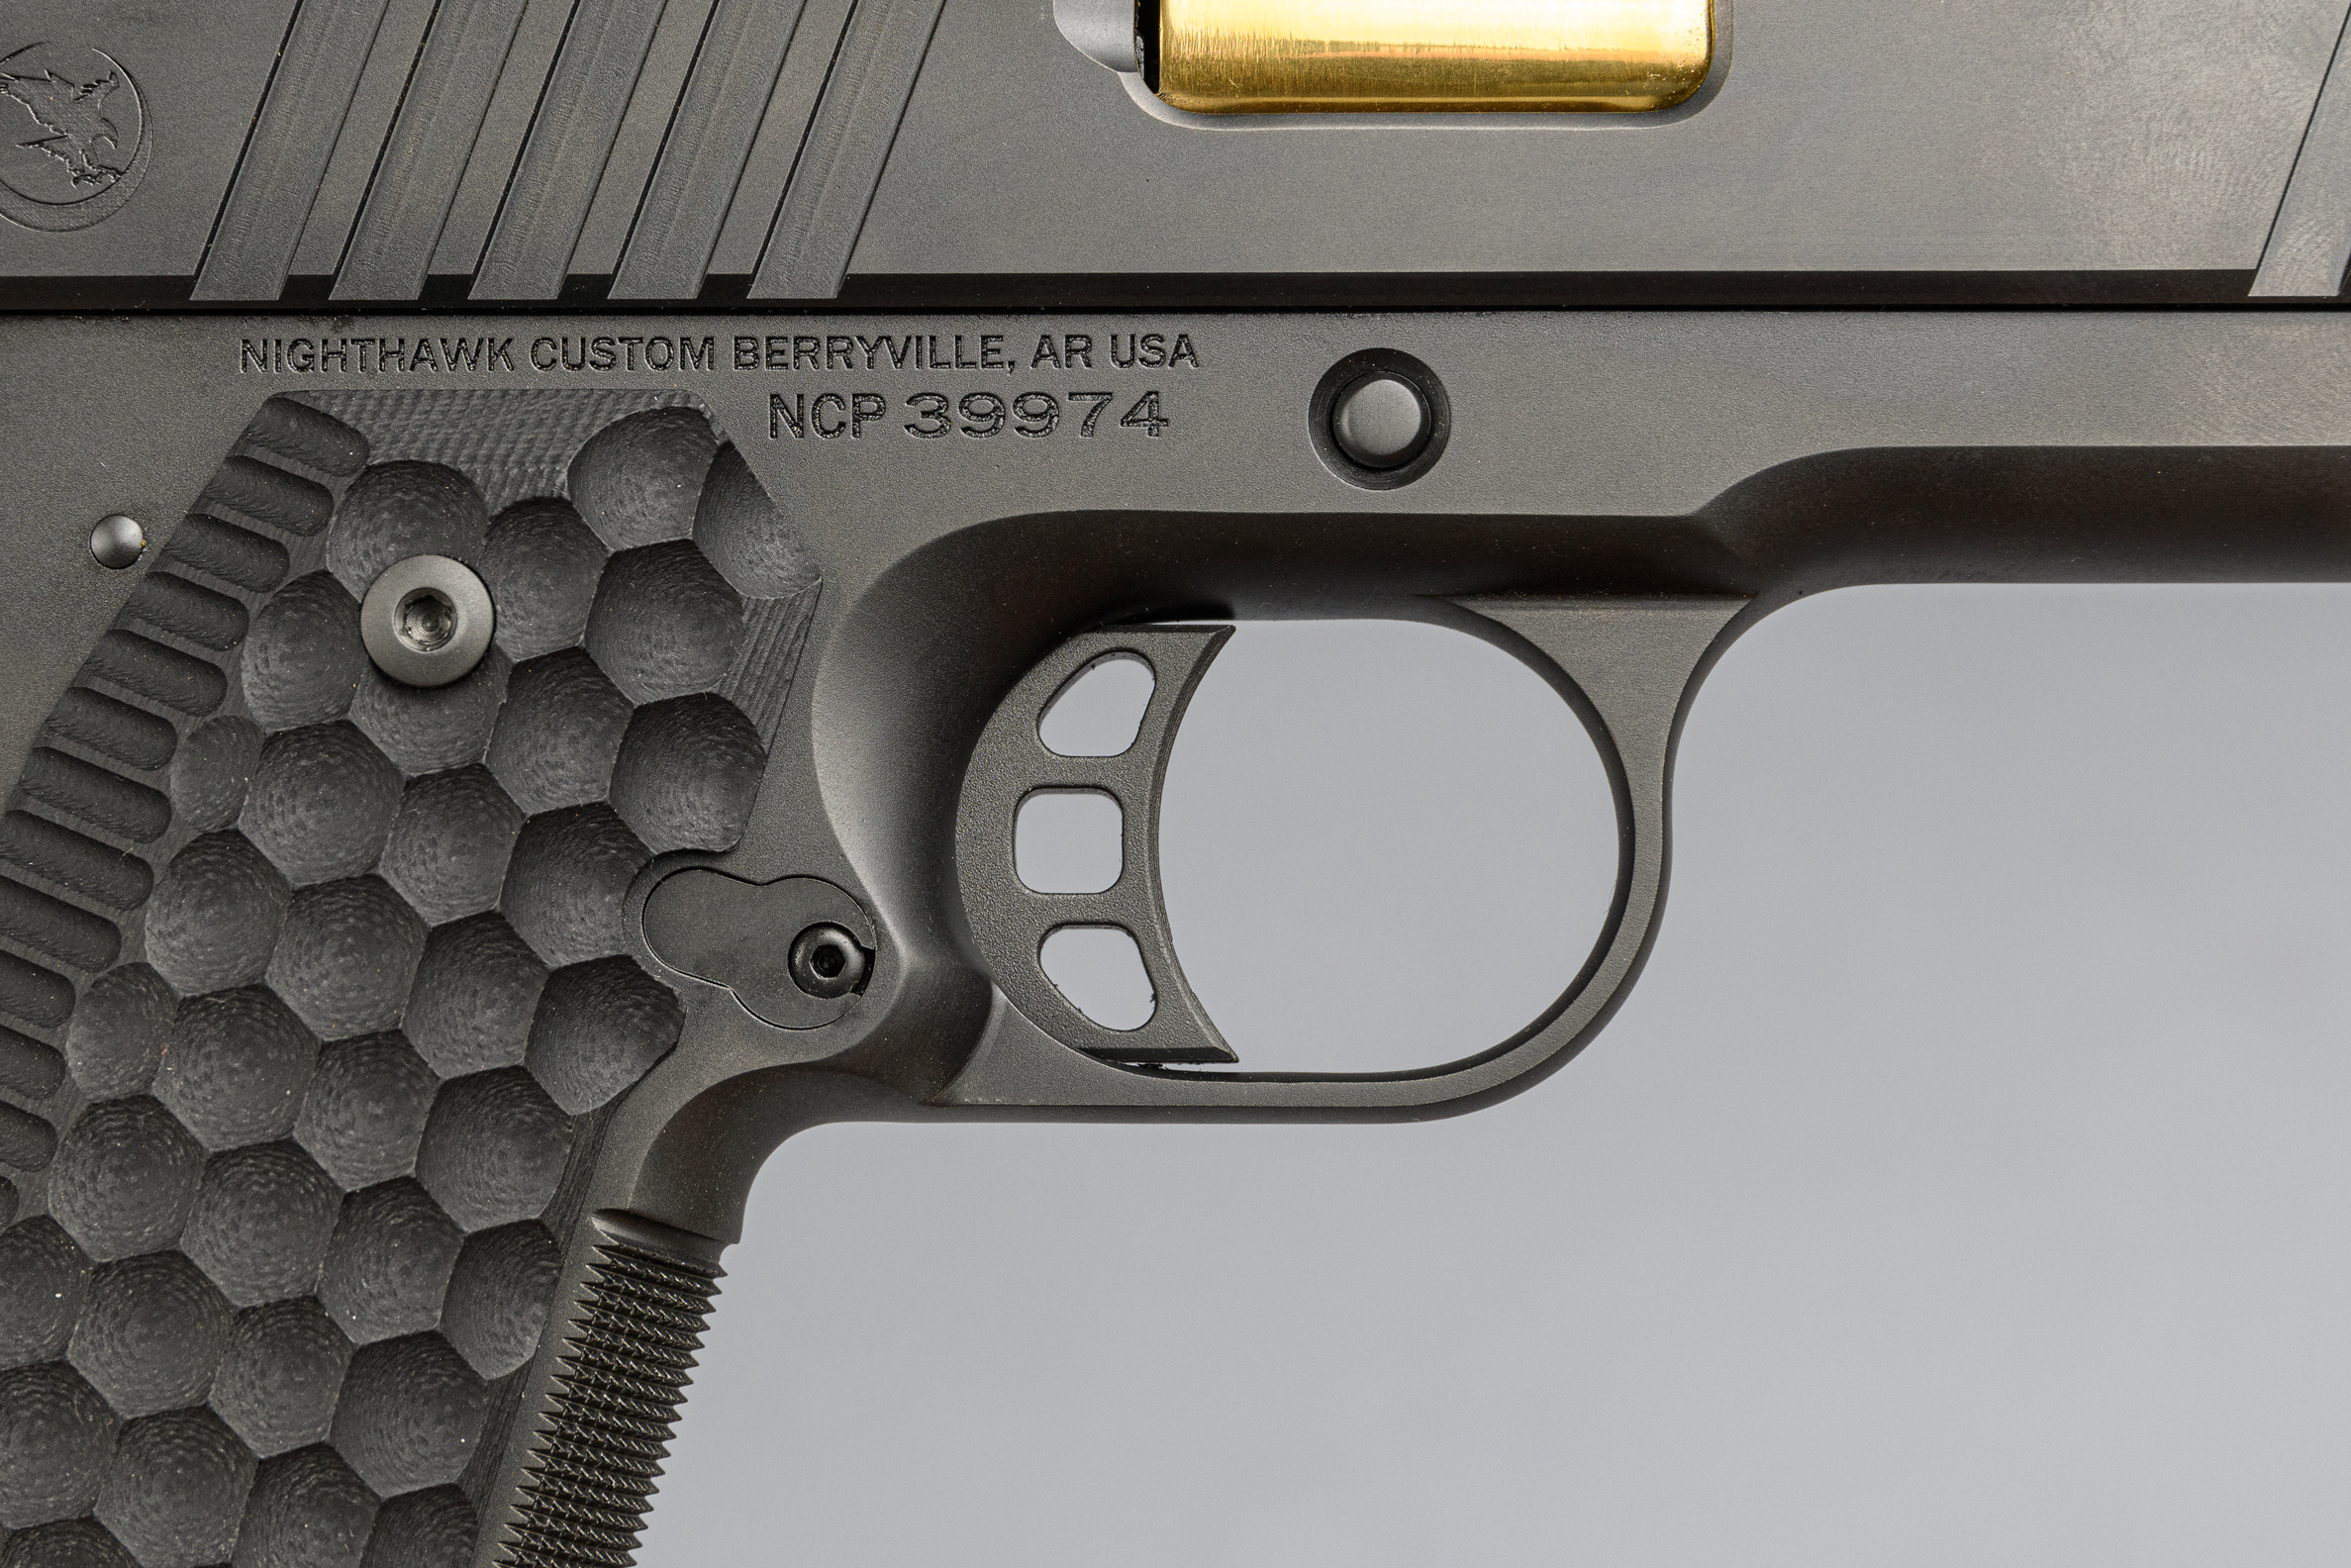 The Nighthawk Custom President features deep-pocked grip scales and an excellent trigger